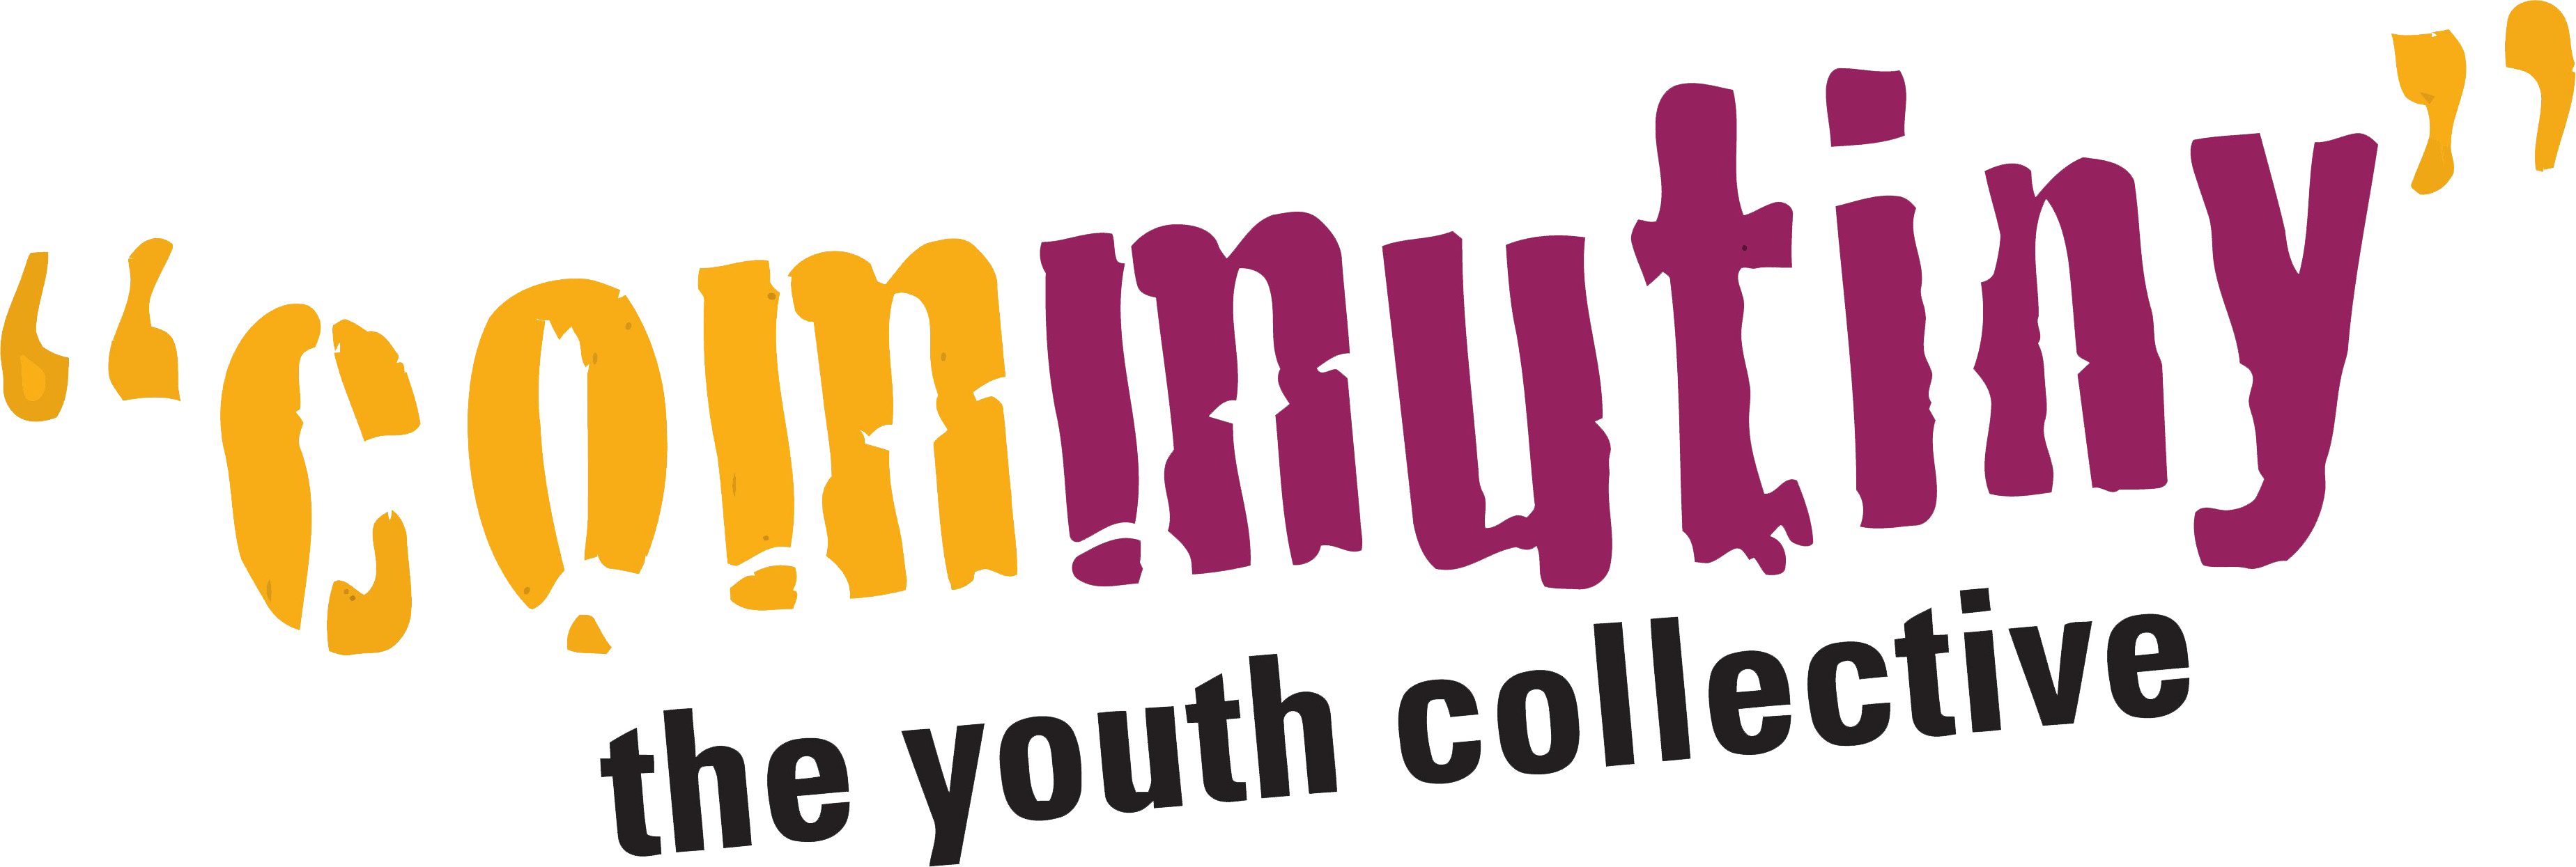 ComMutiny – The Youth Collective (CYC)